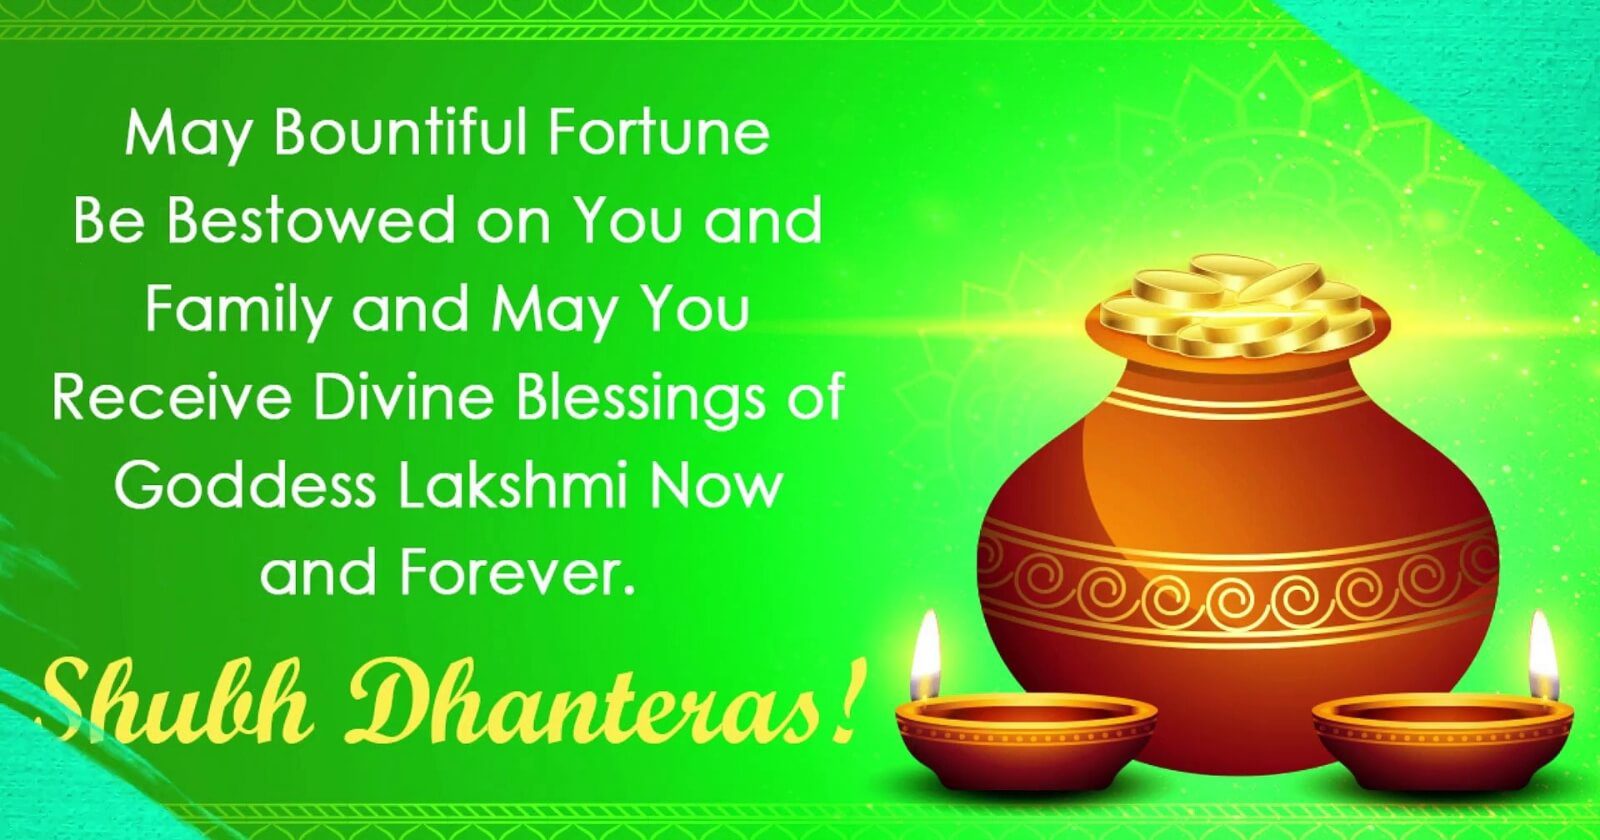 Dhanteras wishes images